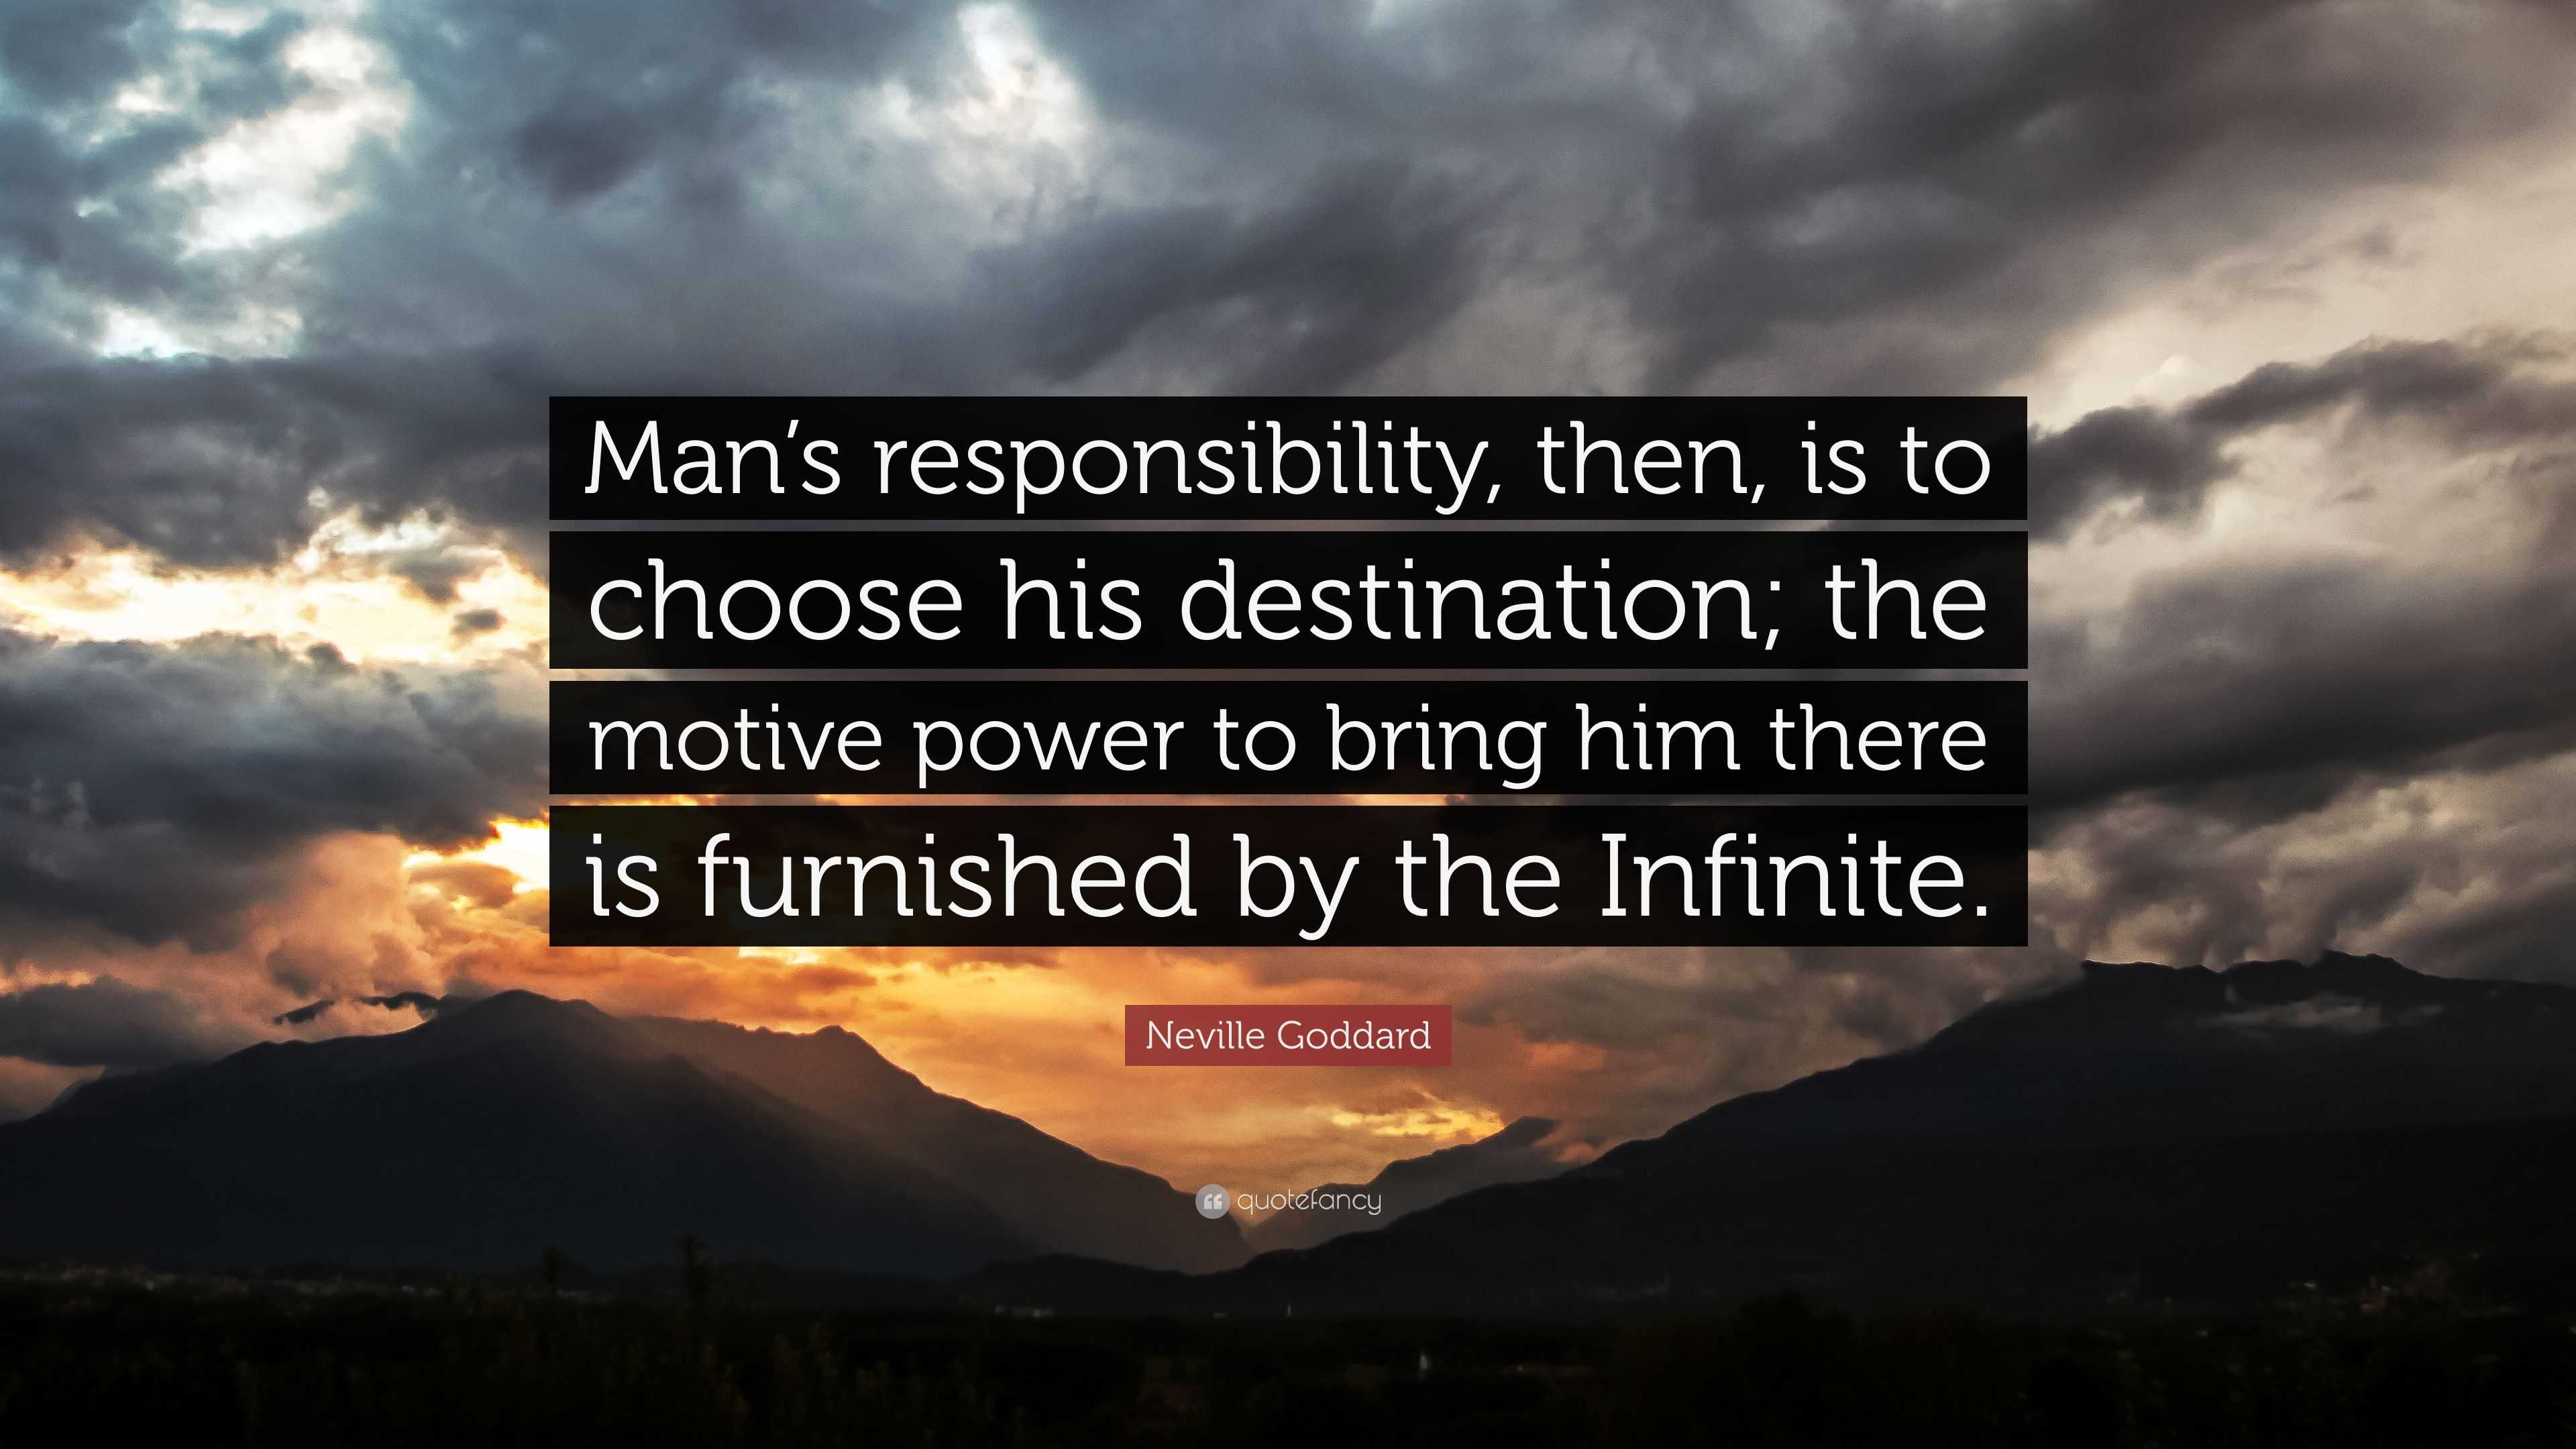 Neville Goddard Quote: “Man's responsibility, then, is to choose his  destination; the motive power to bring him there is furnished by the  Infini...”